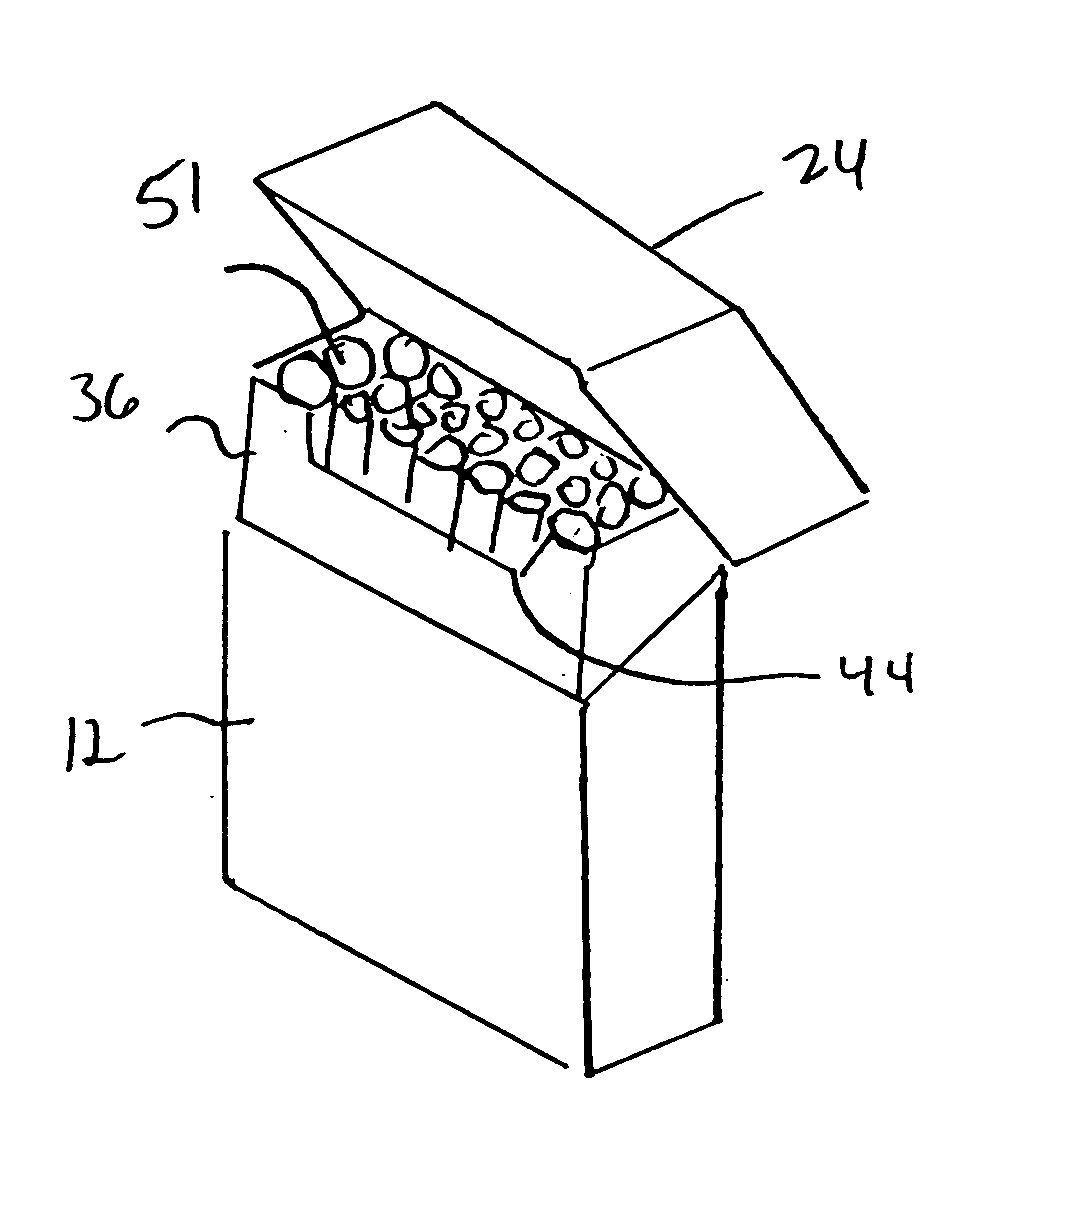 Cigarette pack with cigarette elevation capability